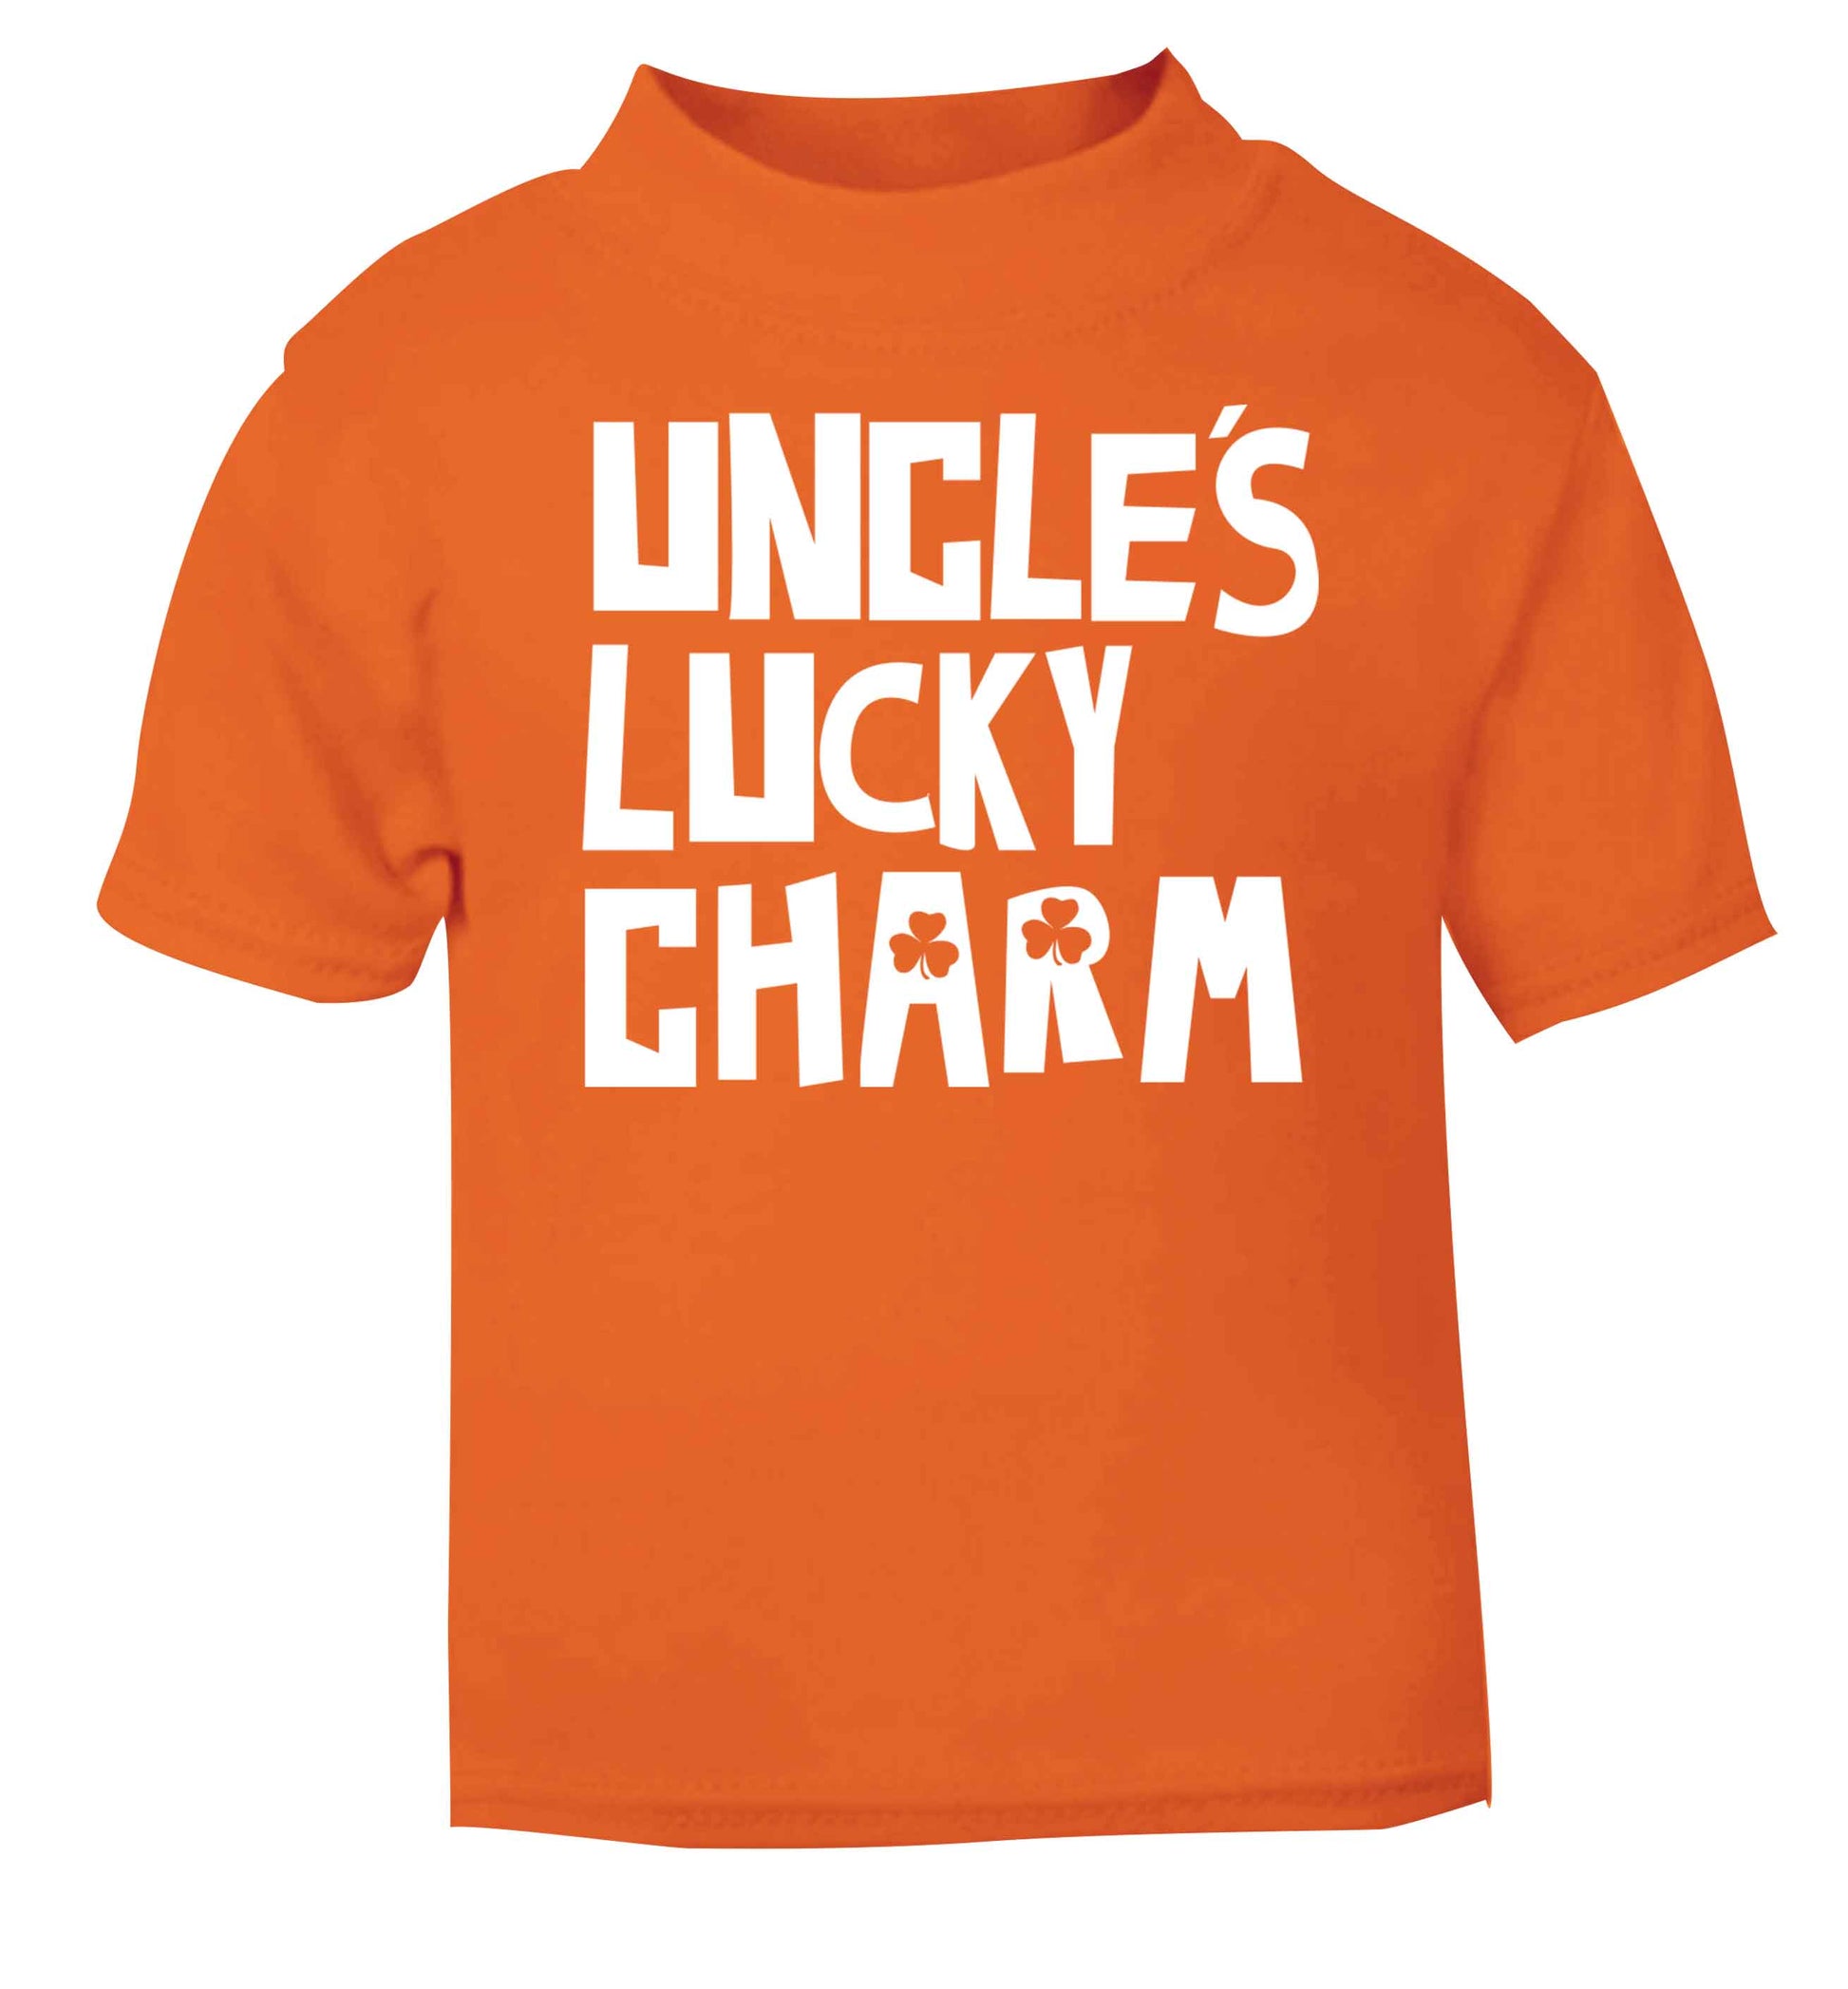 Uncles lucky charm orange baby toddler Tshirt 2 Years